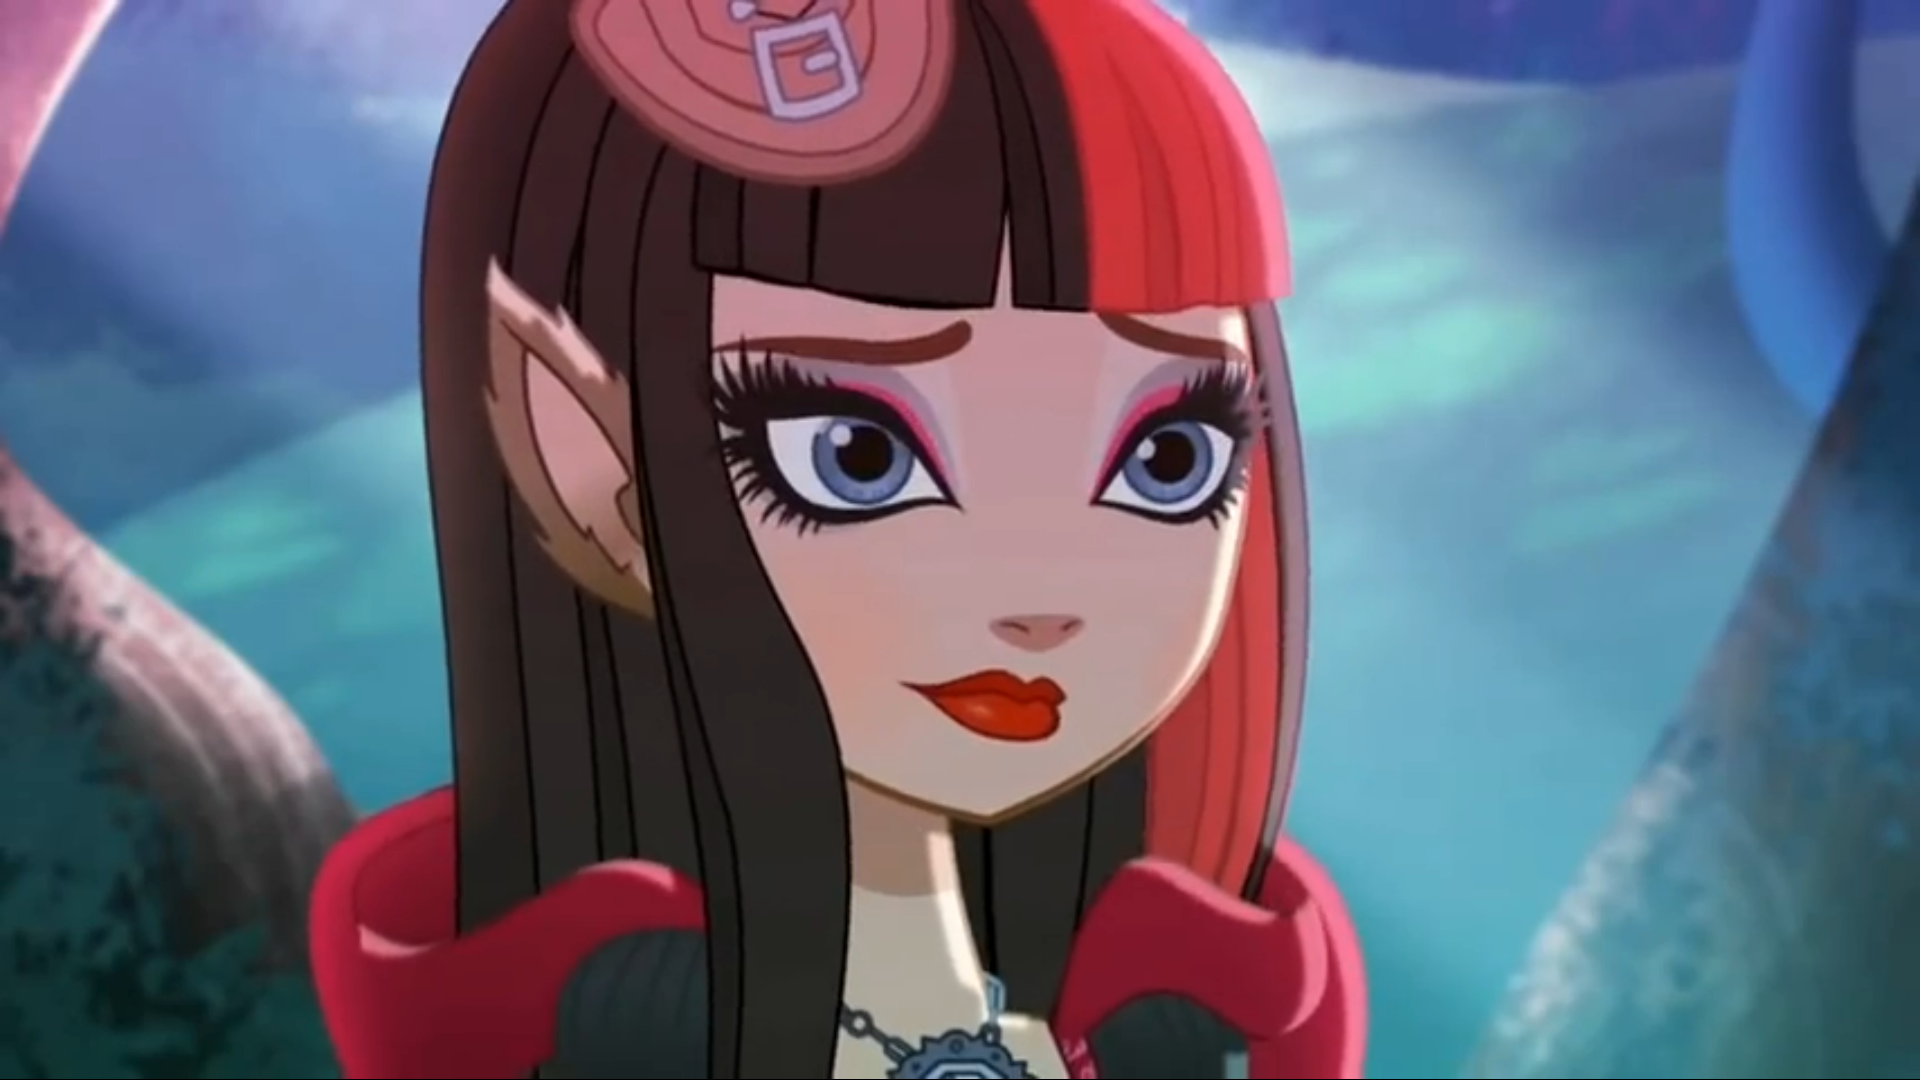 Cerise Hood Character Gallery. Ashlynn and the rest of ever after high